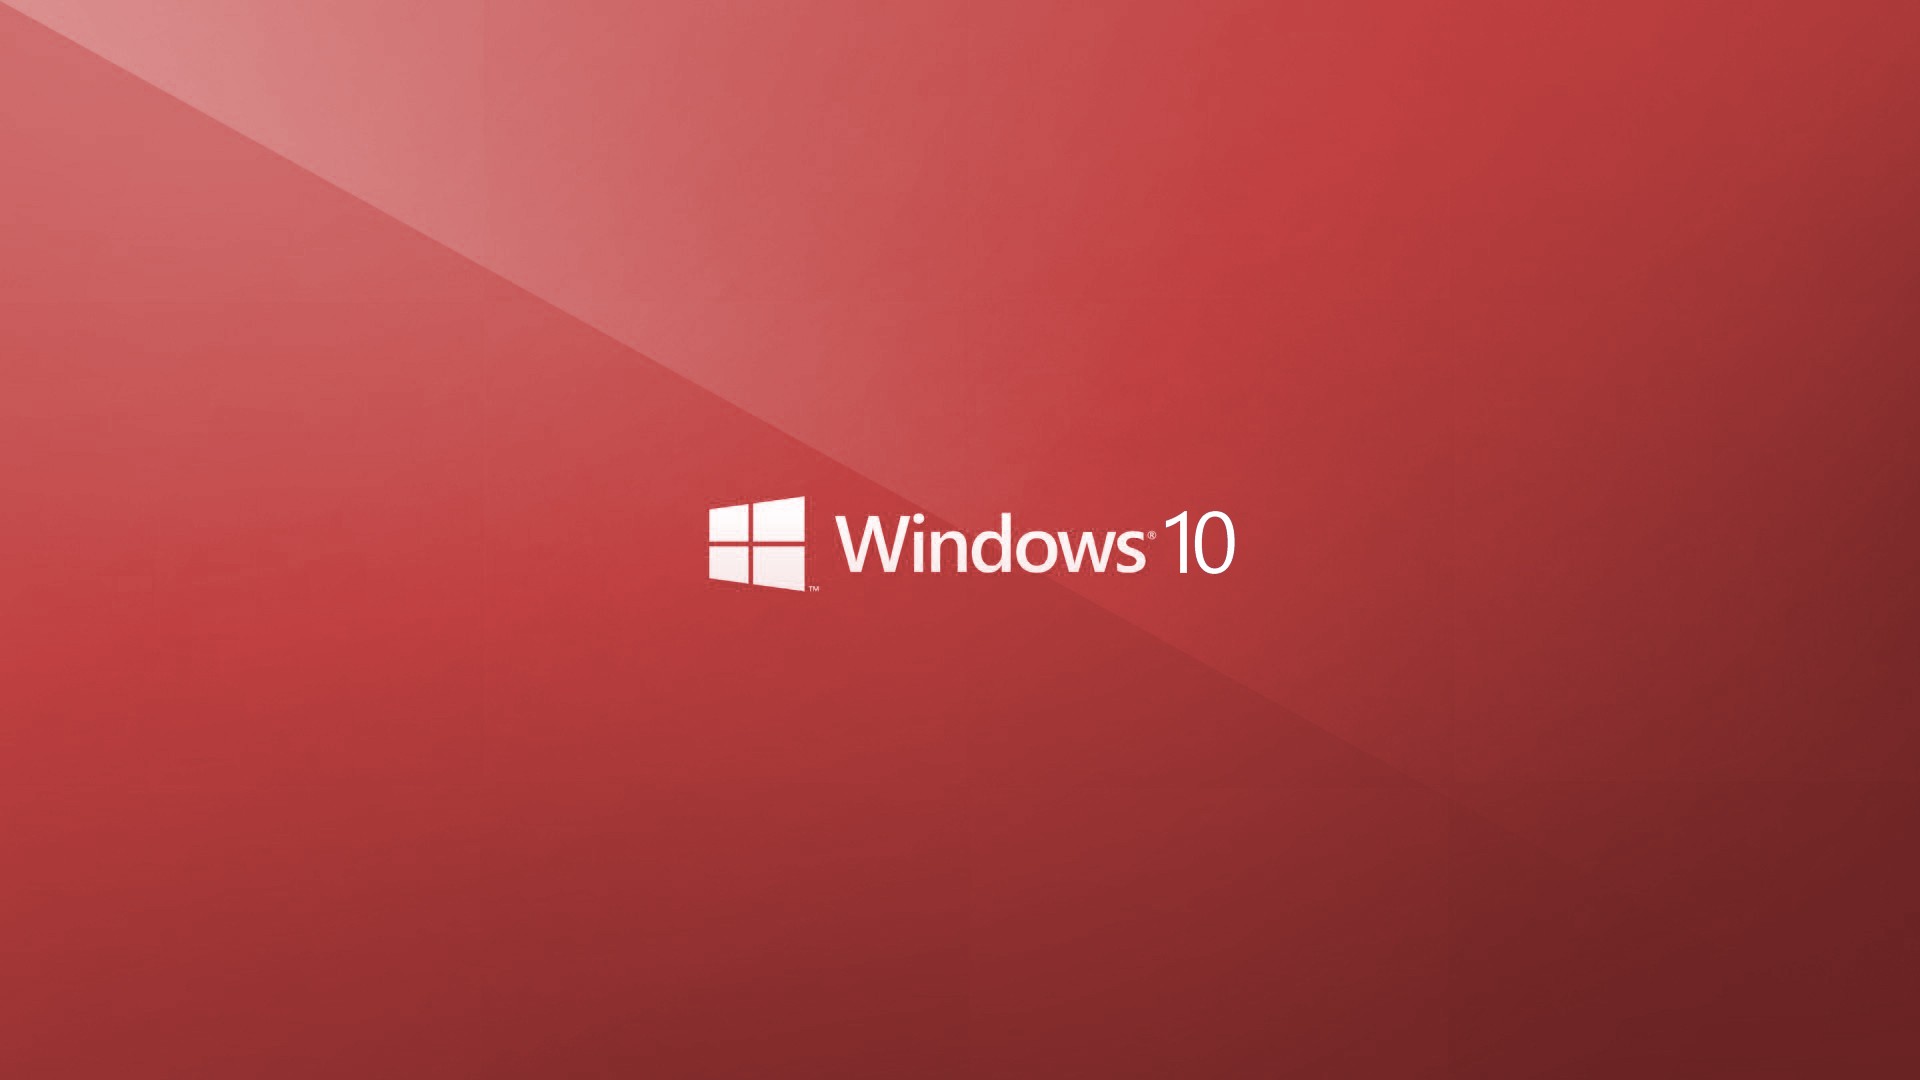 Hd Windows 10 Wallpaper The Red Windows 10 Logo - National Palace Museum , HD Wallpaper & Backgrounds